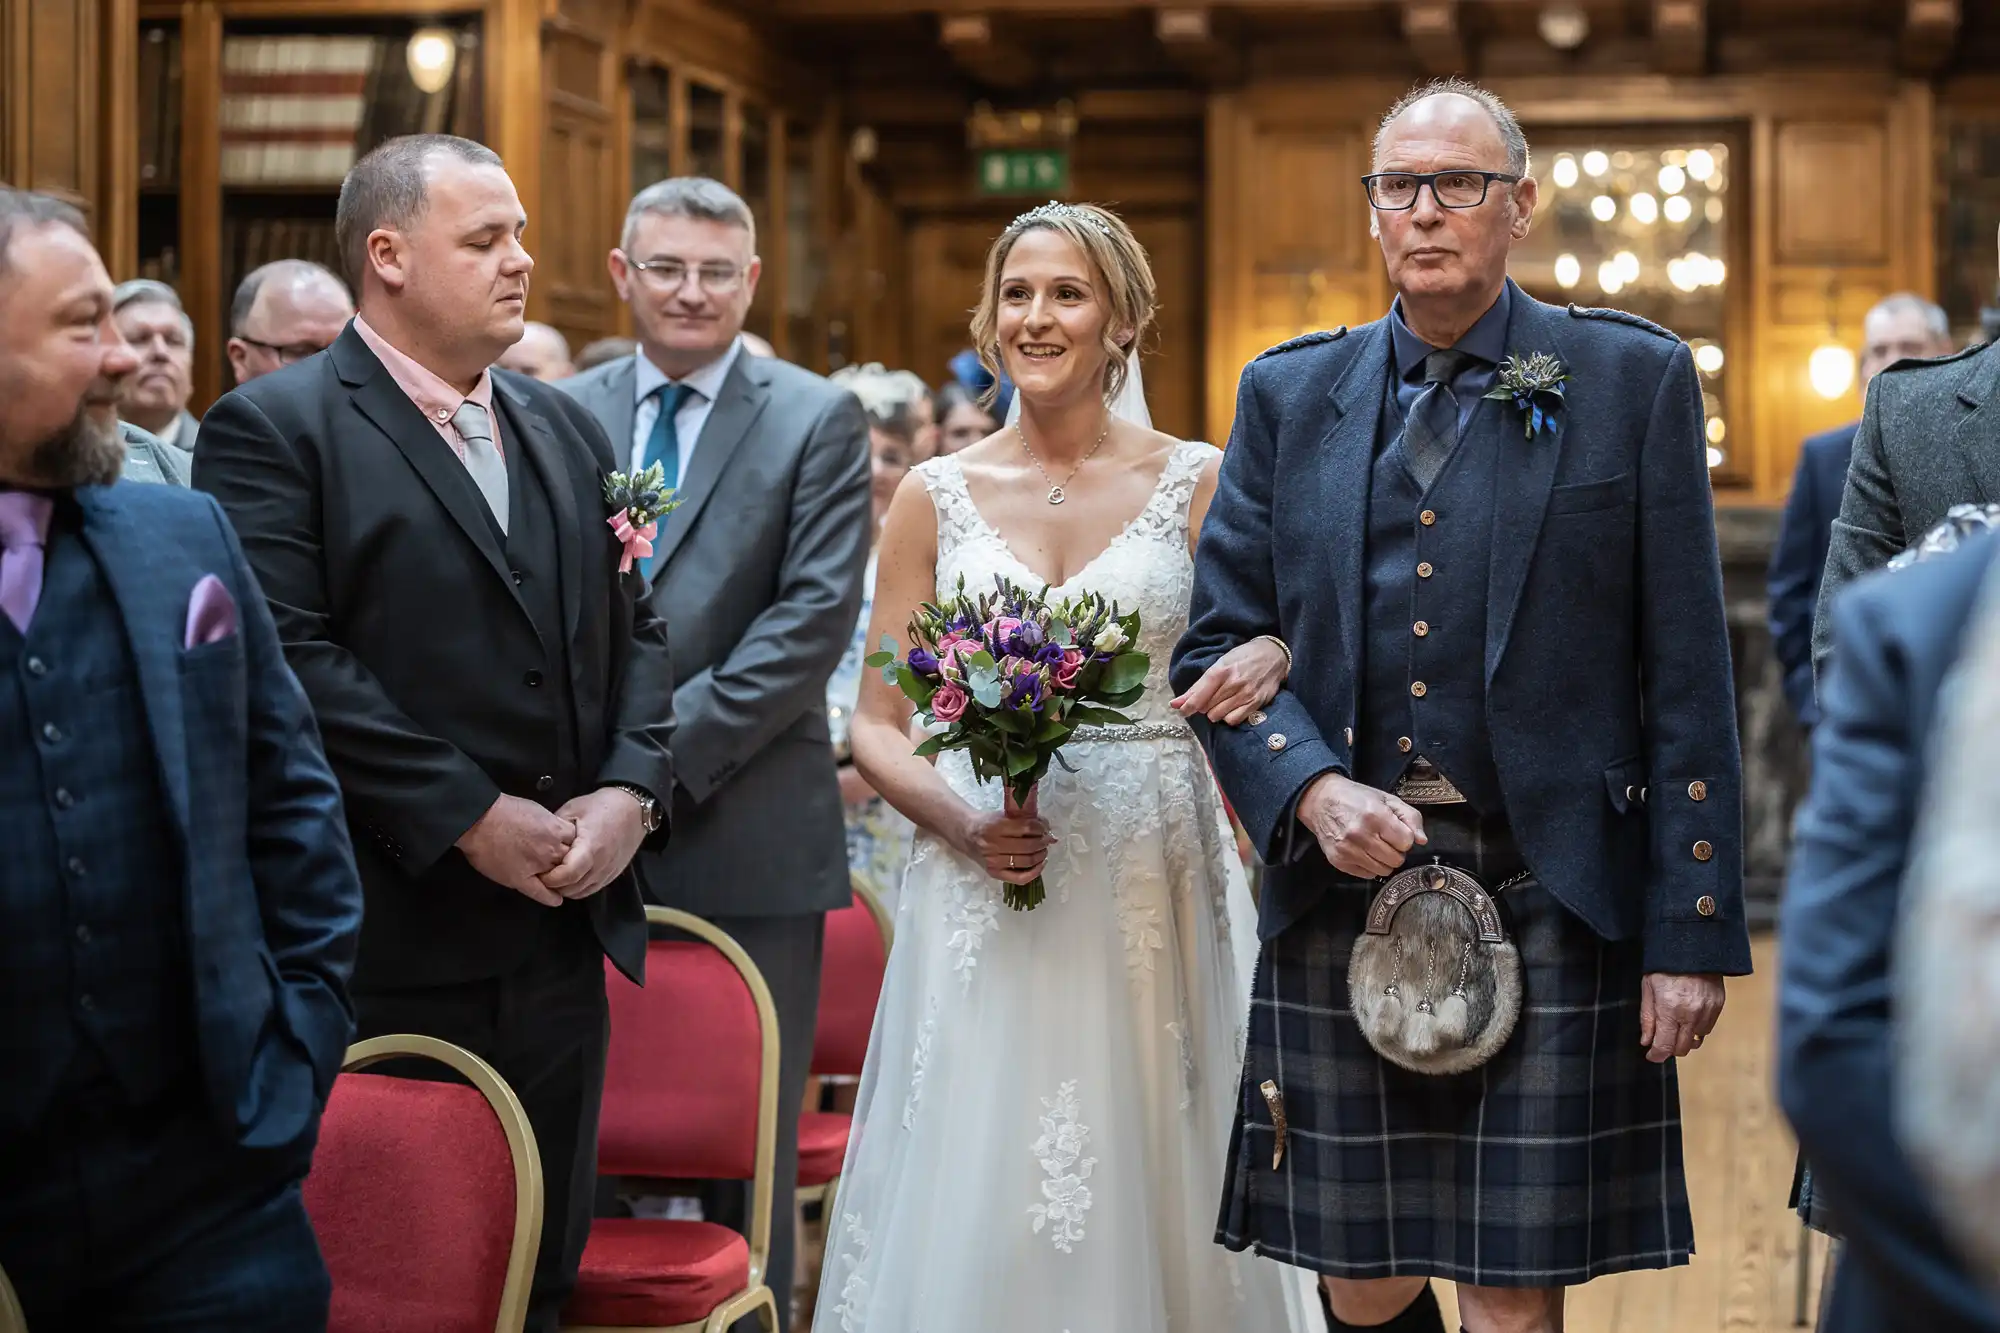 A bride holding a bouquet and smiling is walked down the aisle by an older man in a kilt, surrounded by standing men in suits inside a wooden-paneled room.